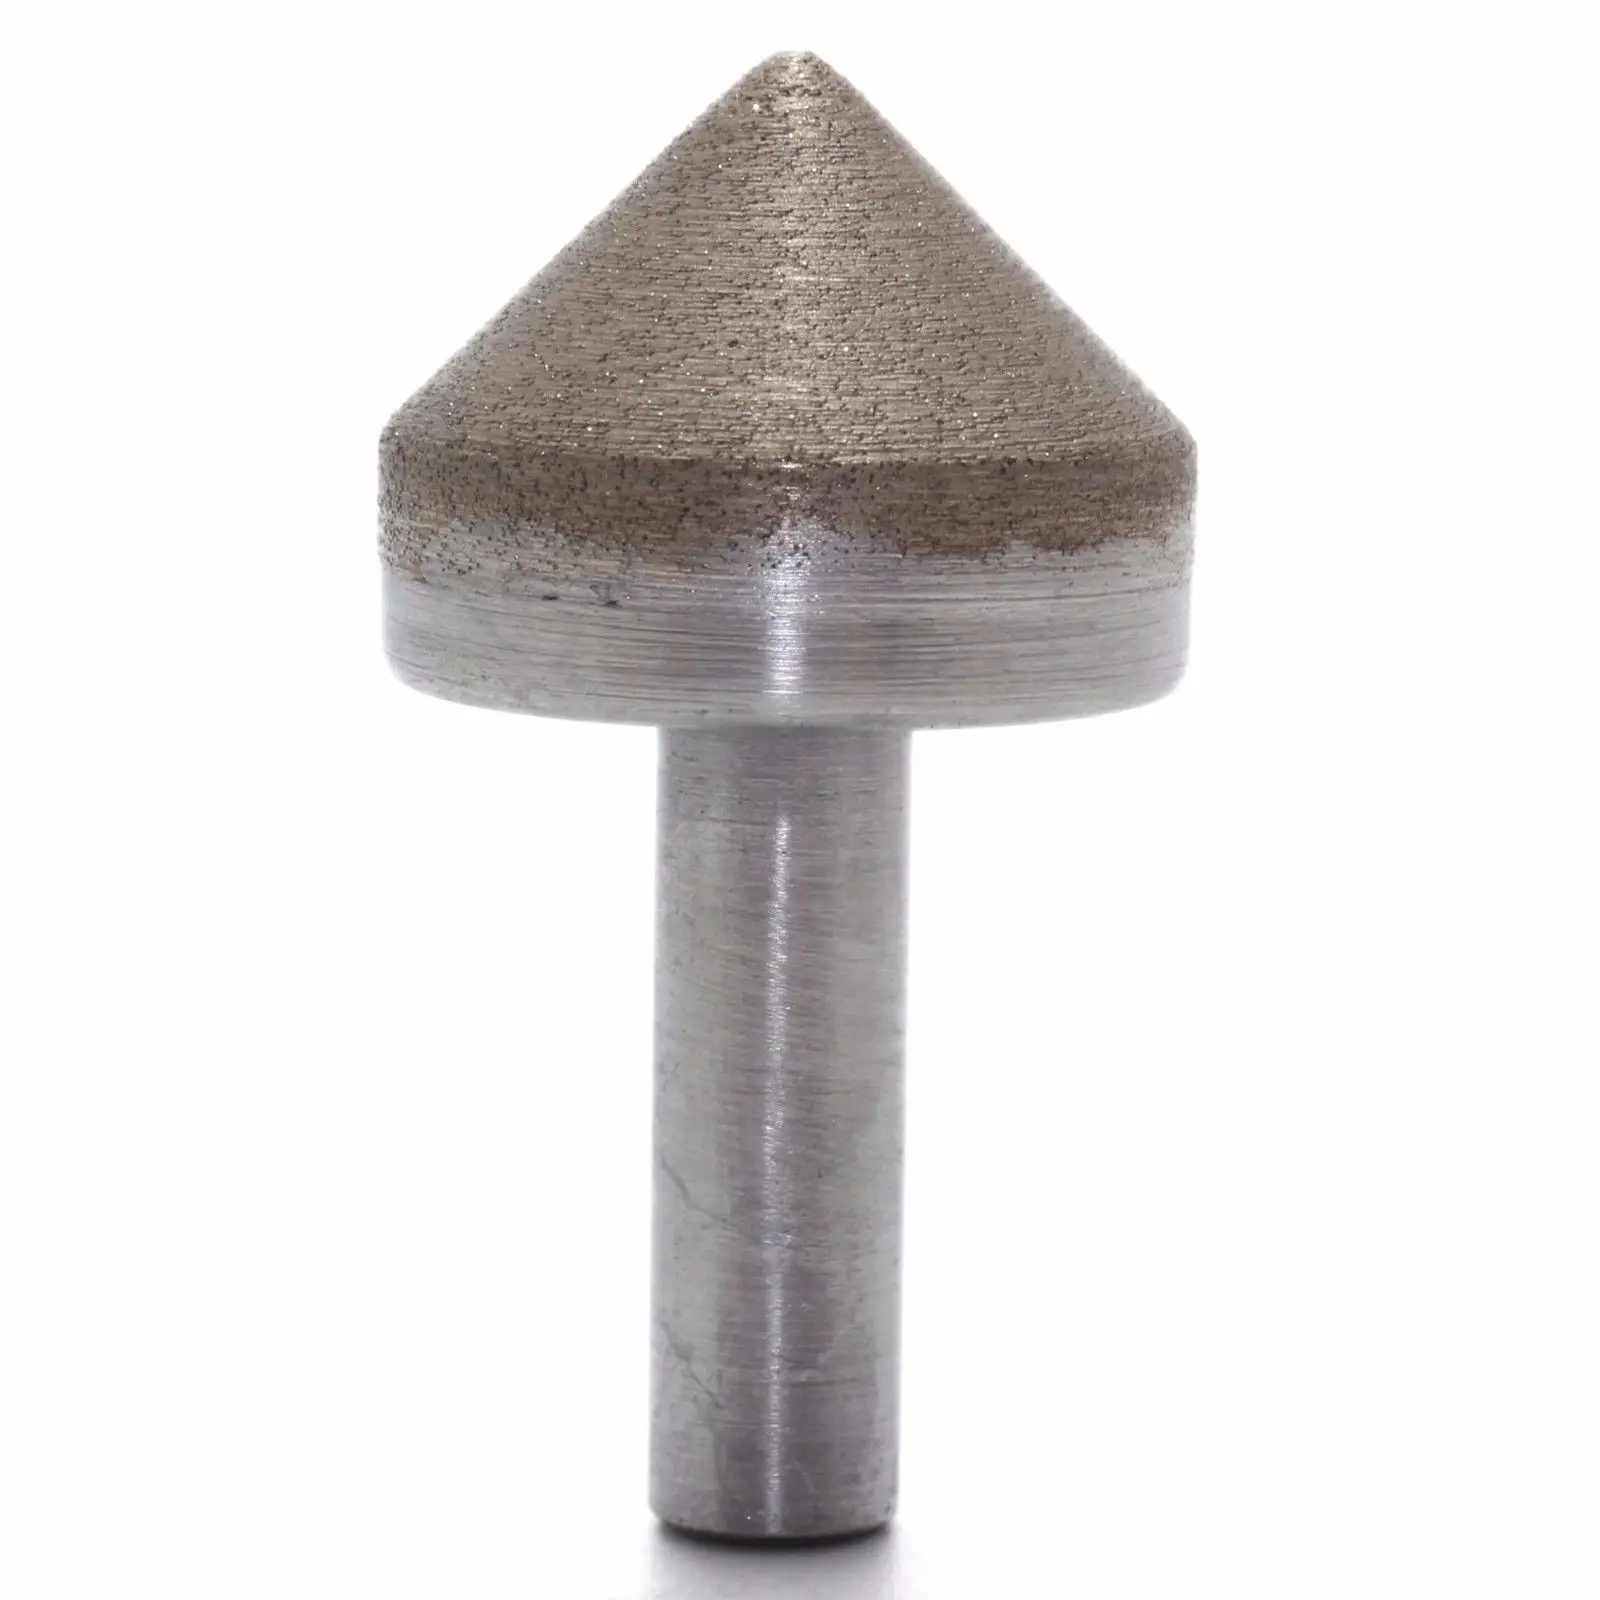 Diamond Sintered Mounted Point 2Pcs Marble Granite Stone Hole Groove Drill Sharpening Bit Grit 30 